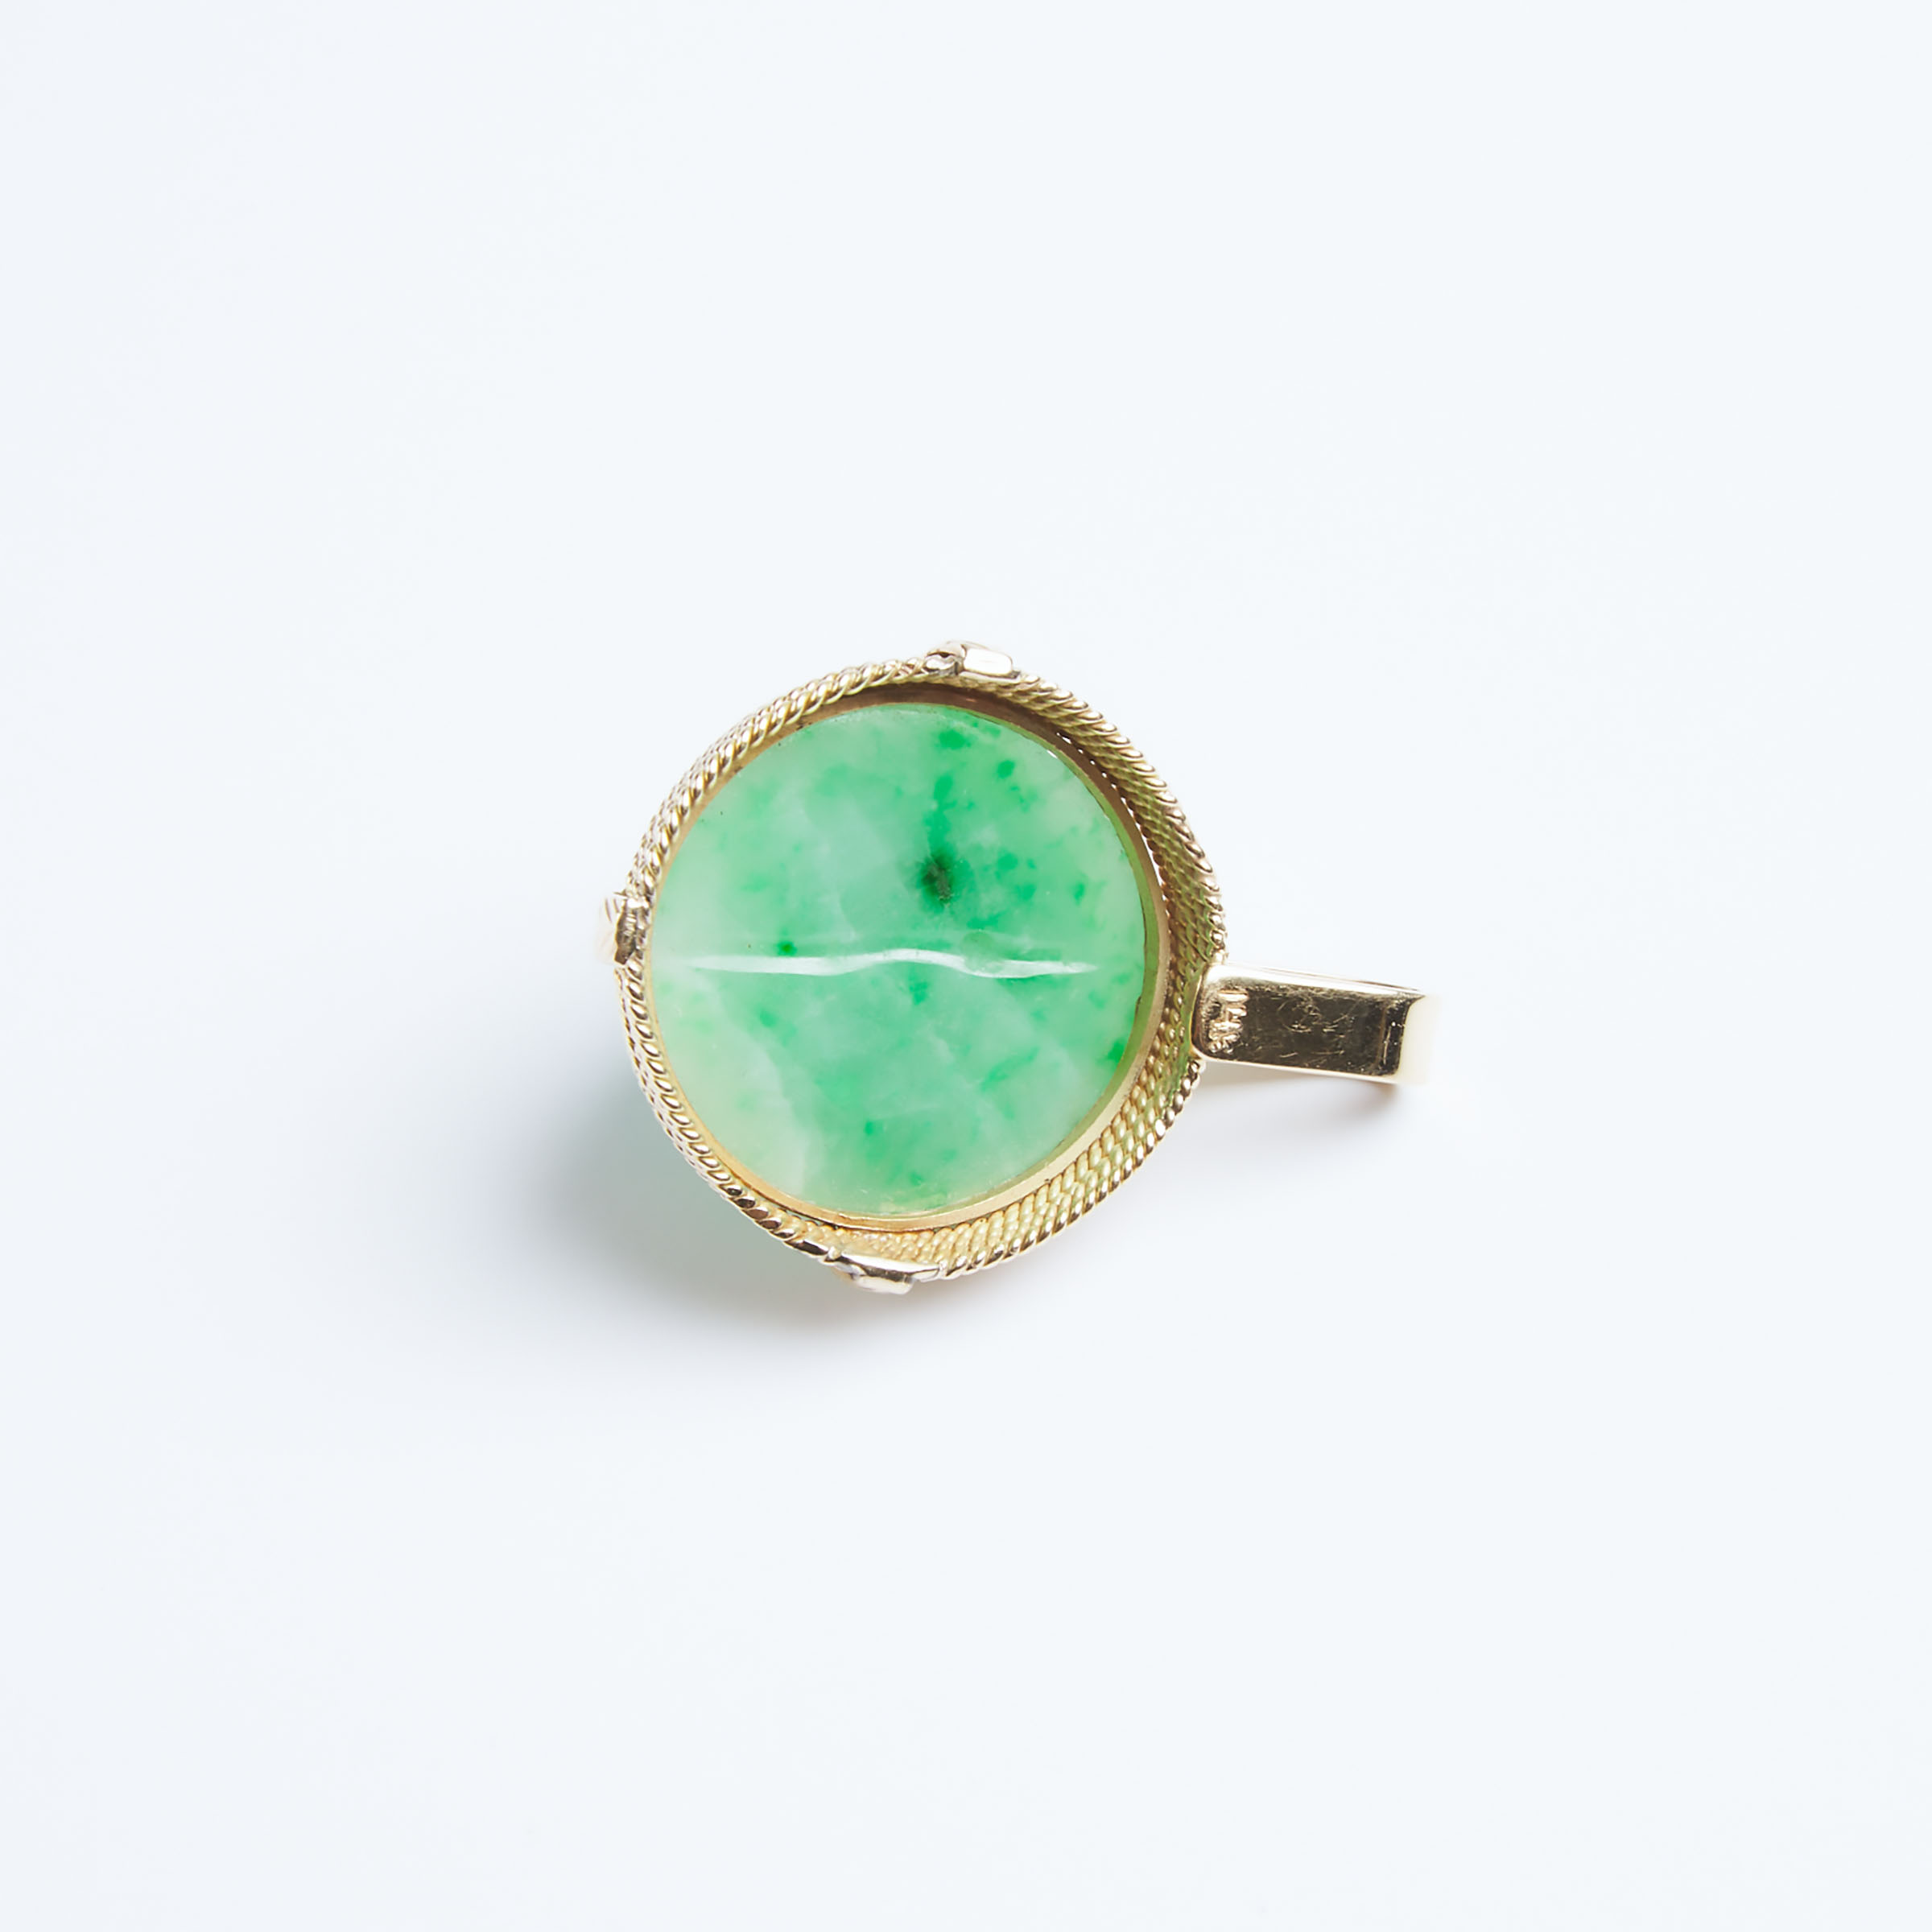 A Carved Jadeite Pendant With 14K Gold Mounting, Republican Period, Early 20th Century